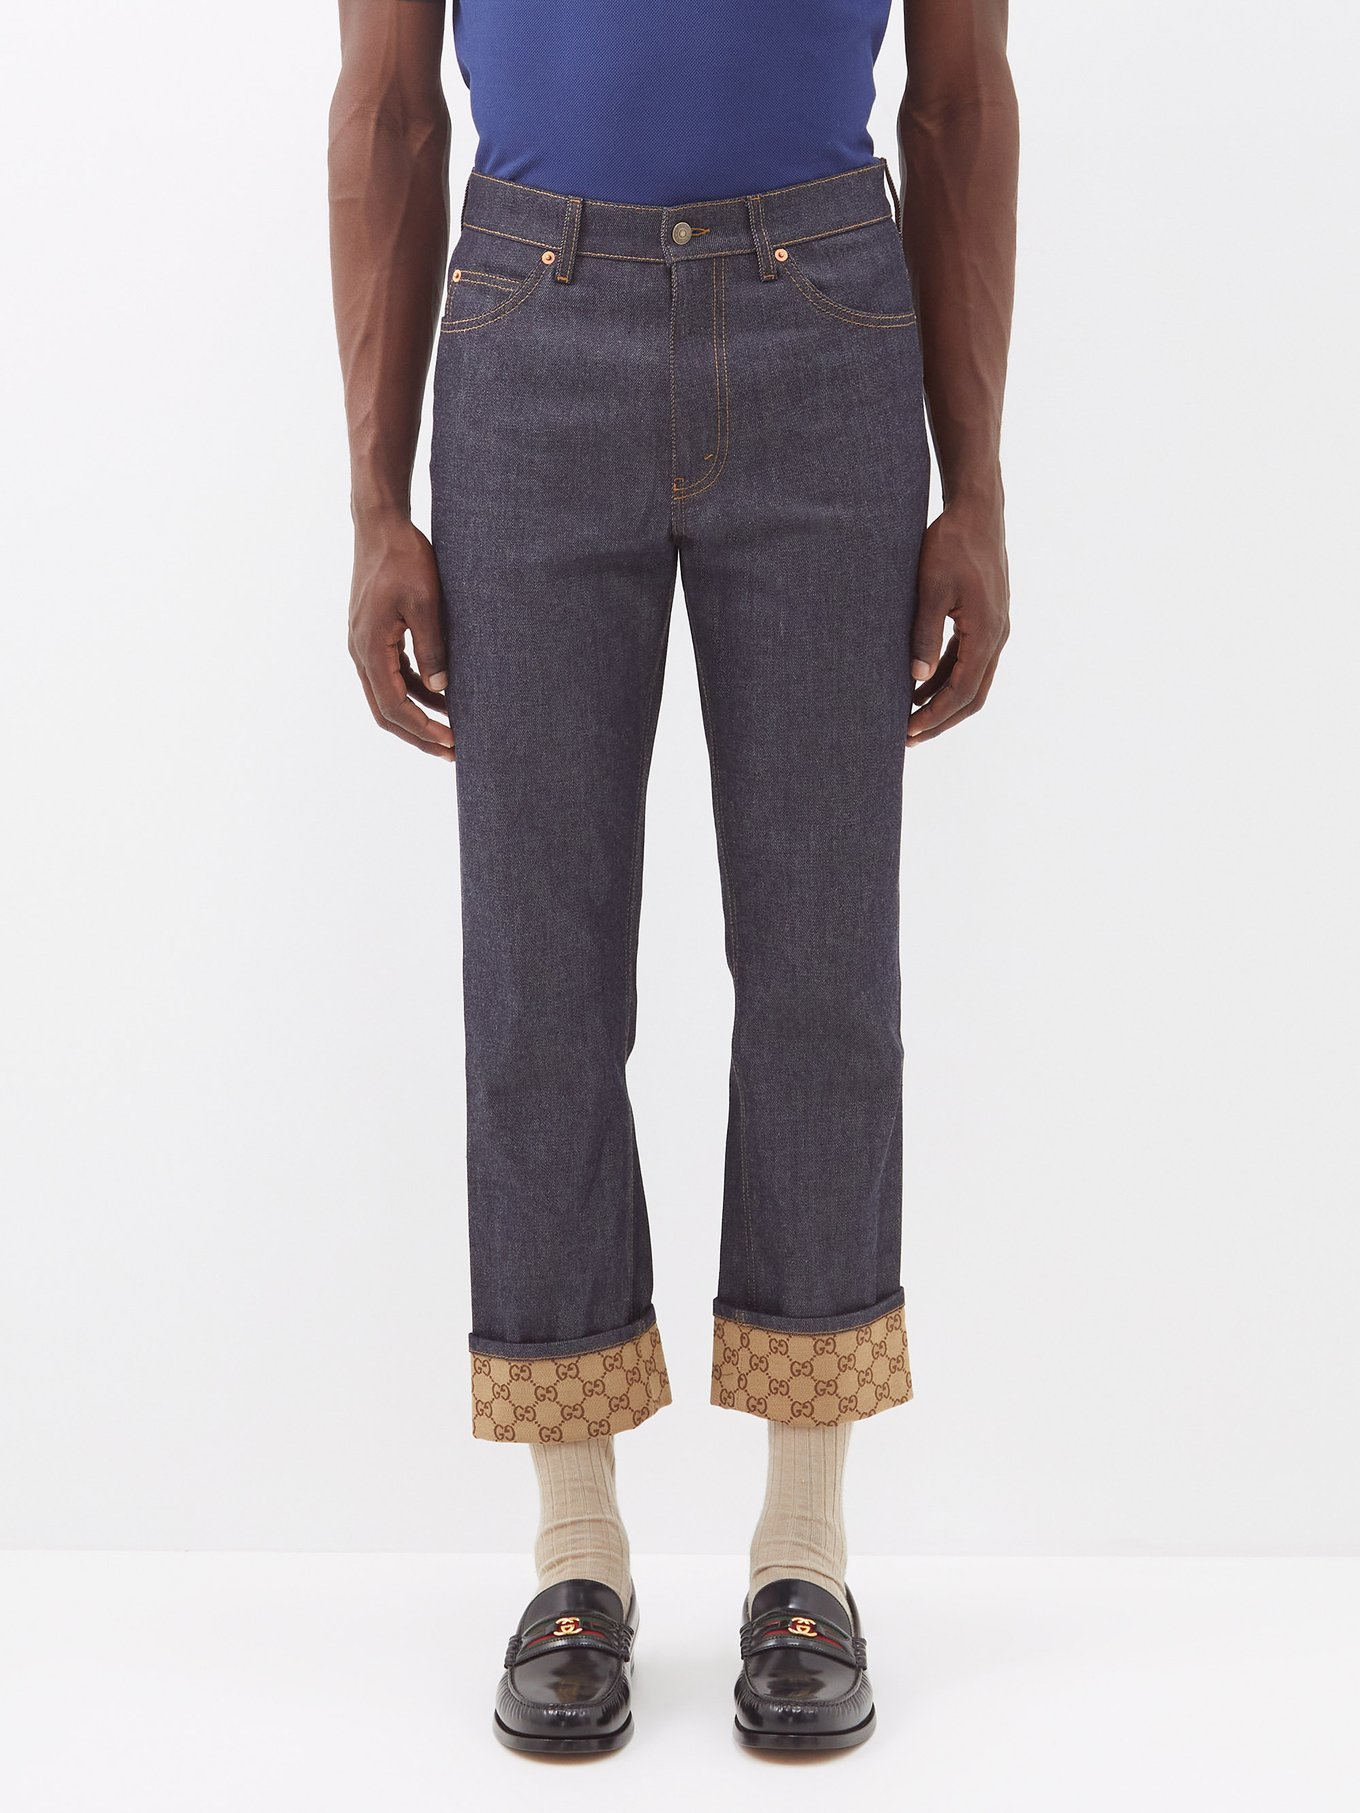 GG Canvas Trimmed Jeans in Blue - Gucci